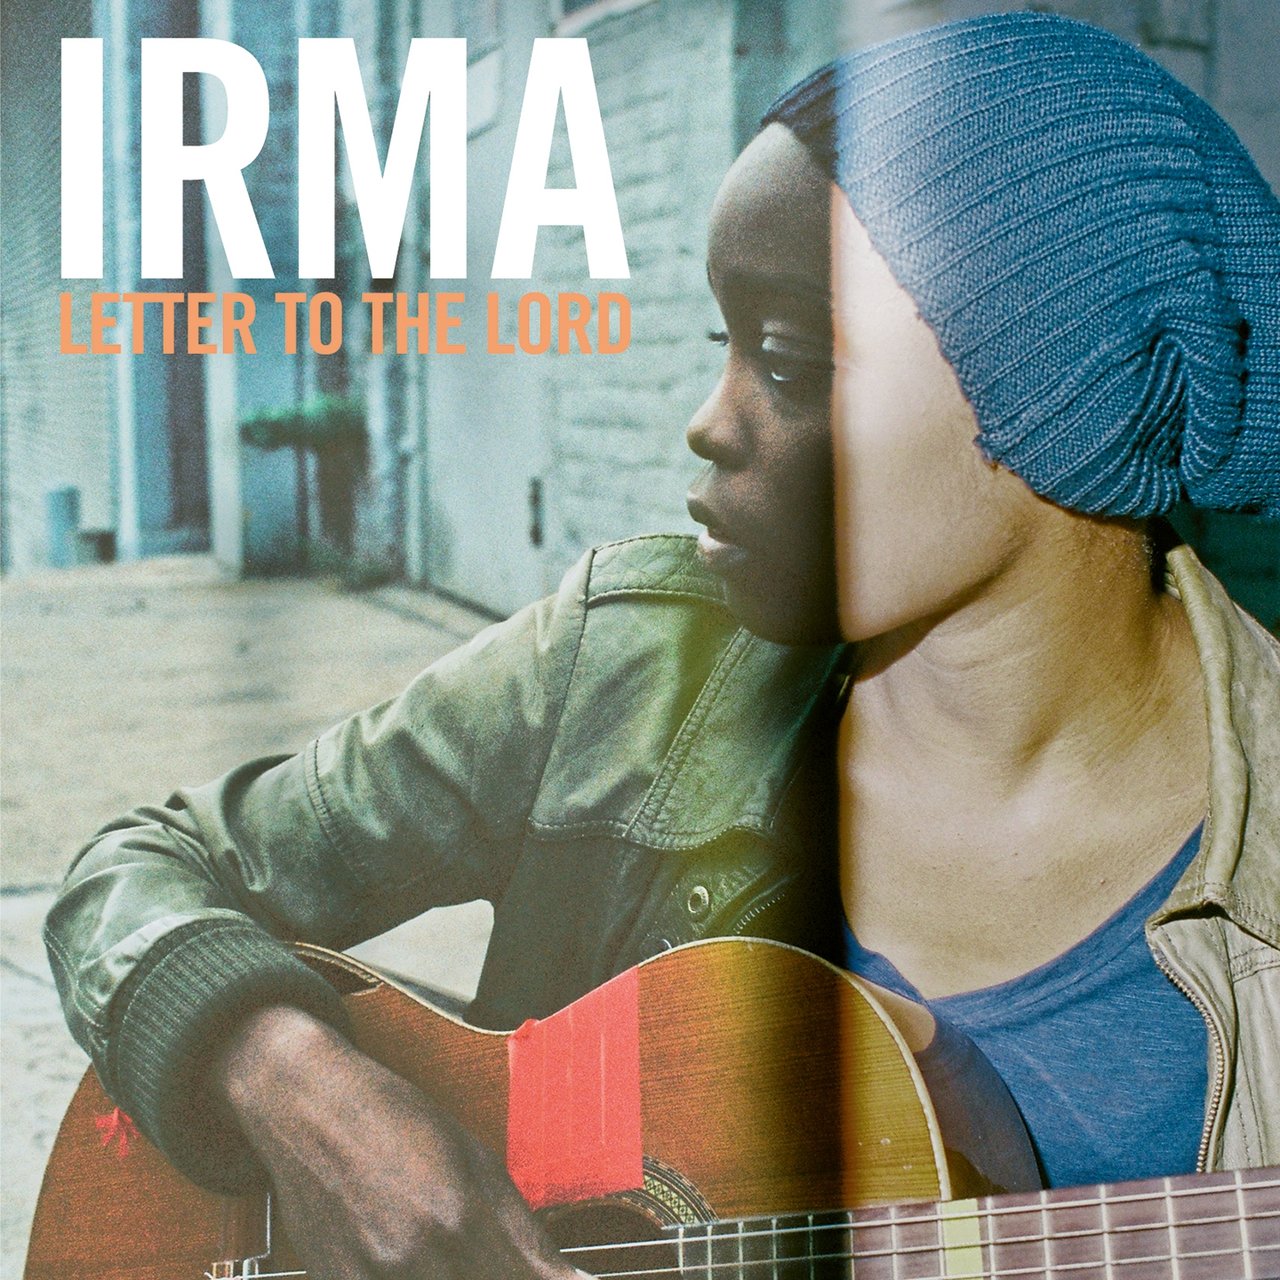 Irma Letter to the Lord cover artwork